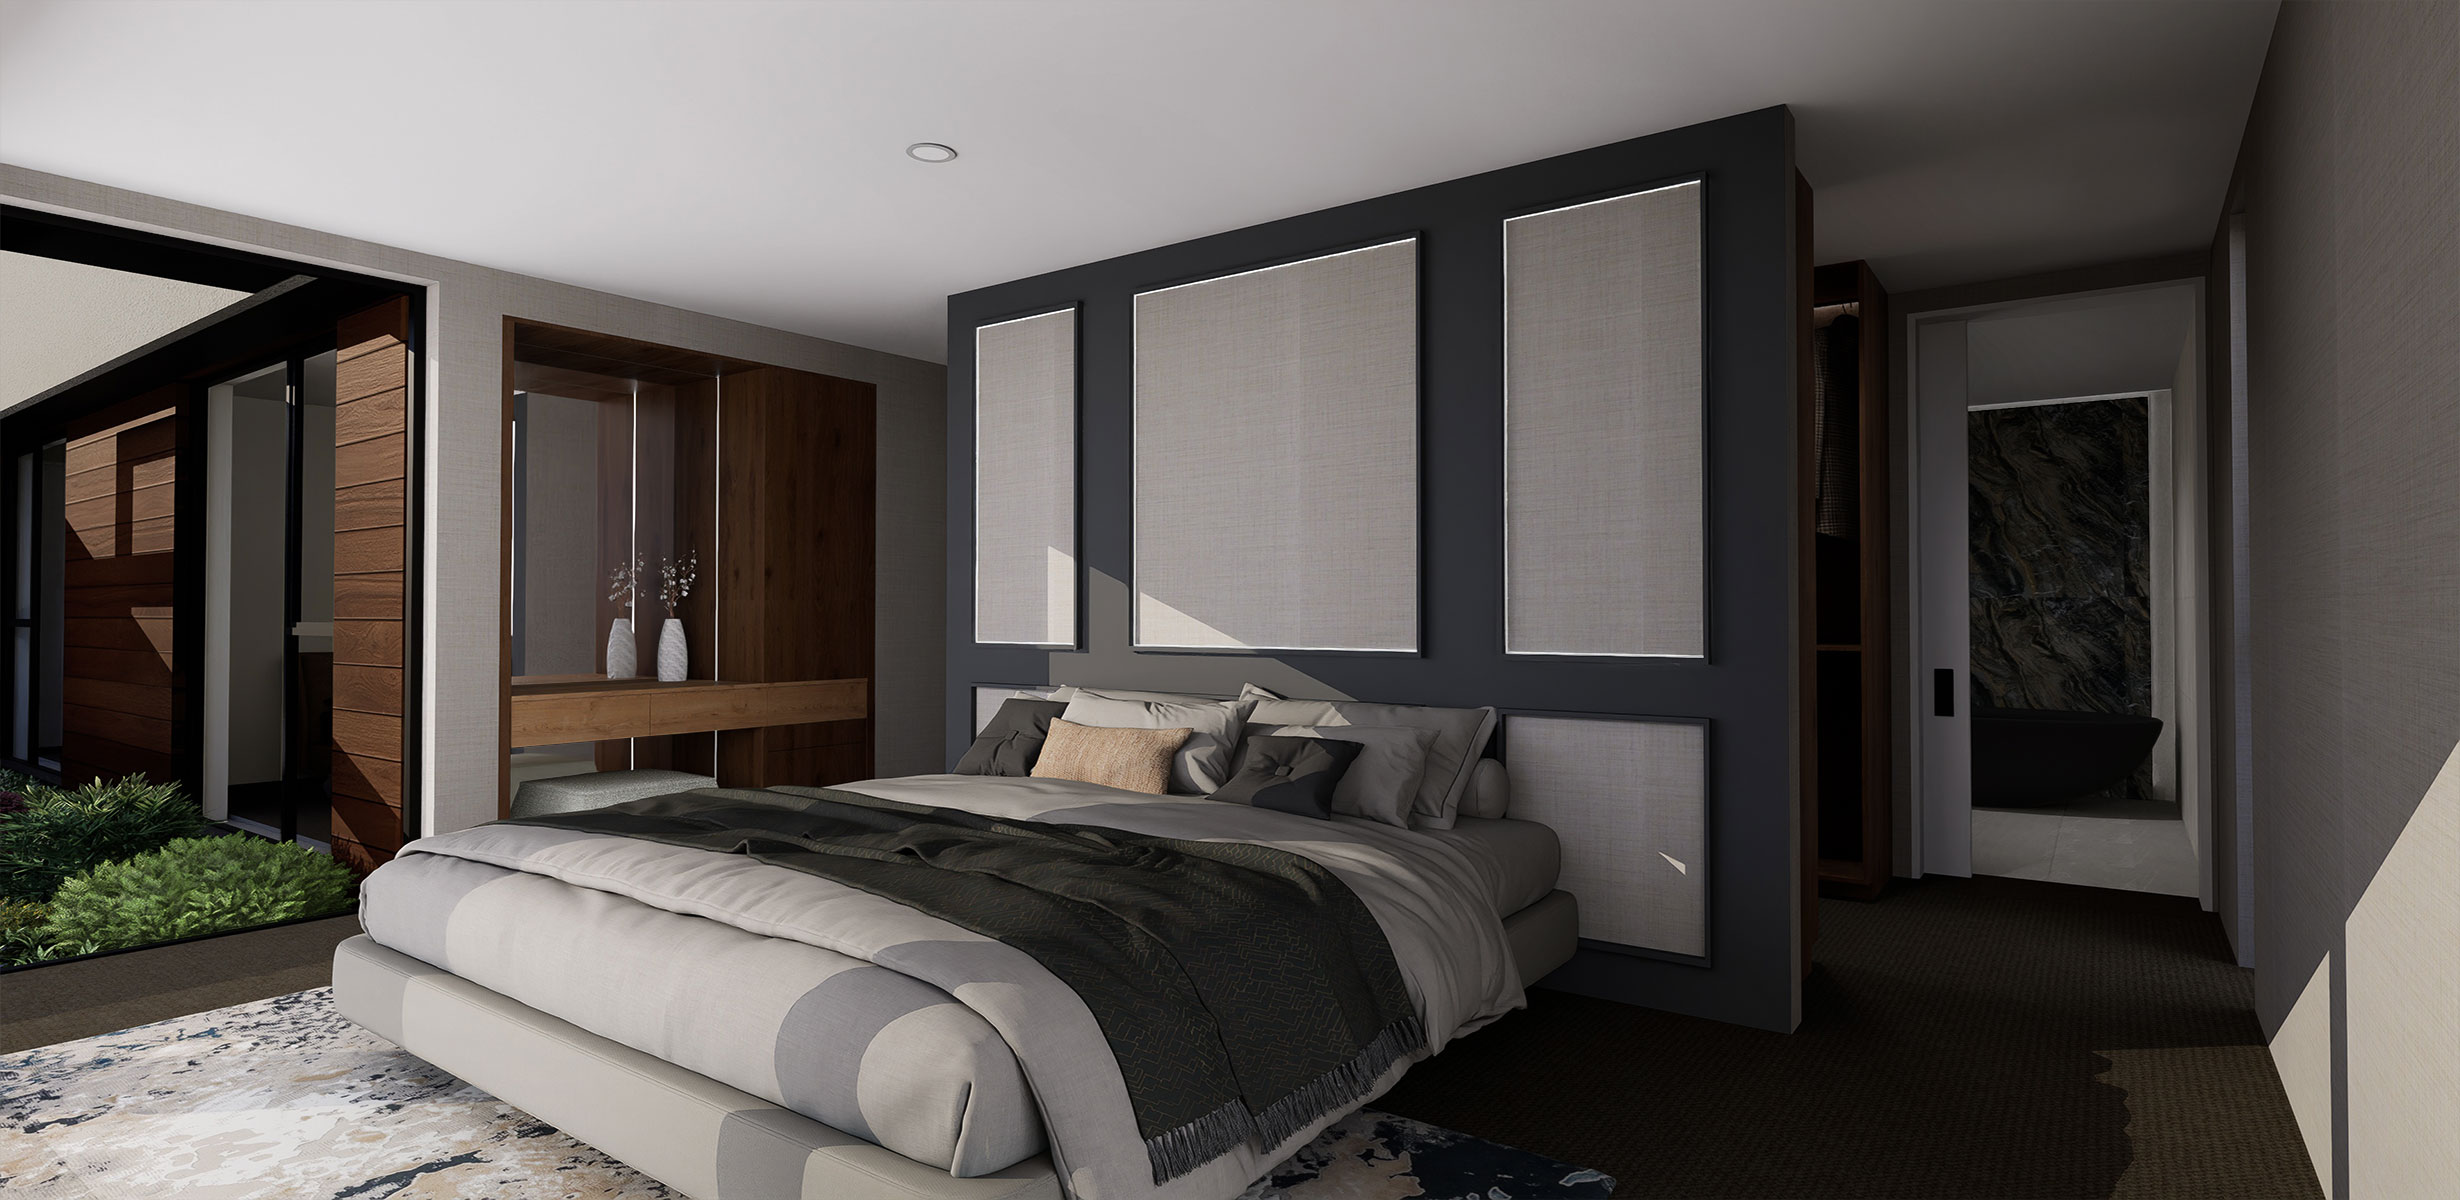 Oakbridge Master Bedroom View NZ - Our spacious open plan design that seamlessly connects living areas and offers stylish functionality. Enjoy ultimate convenience.